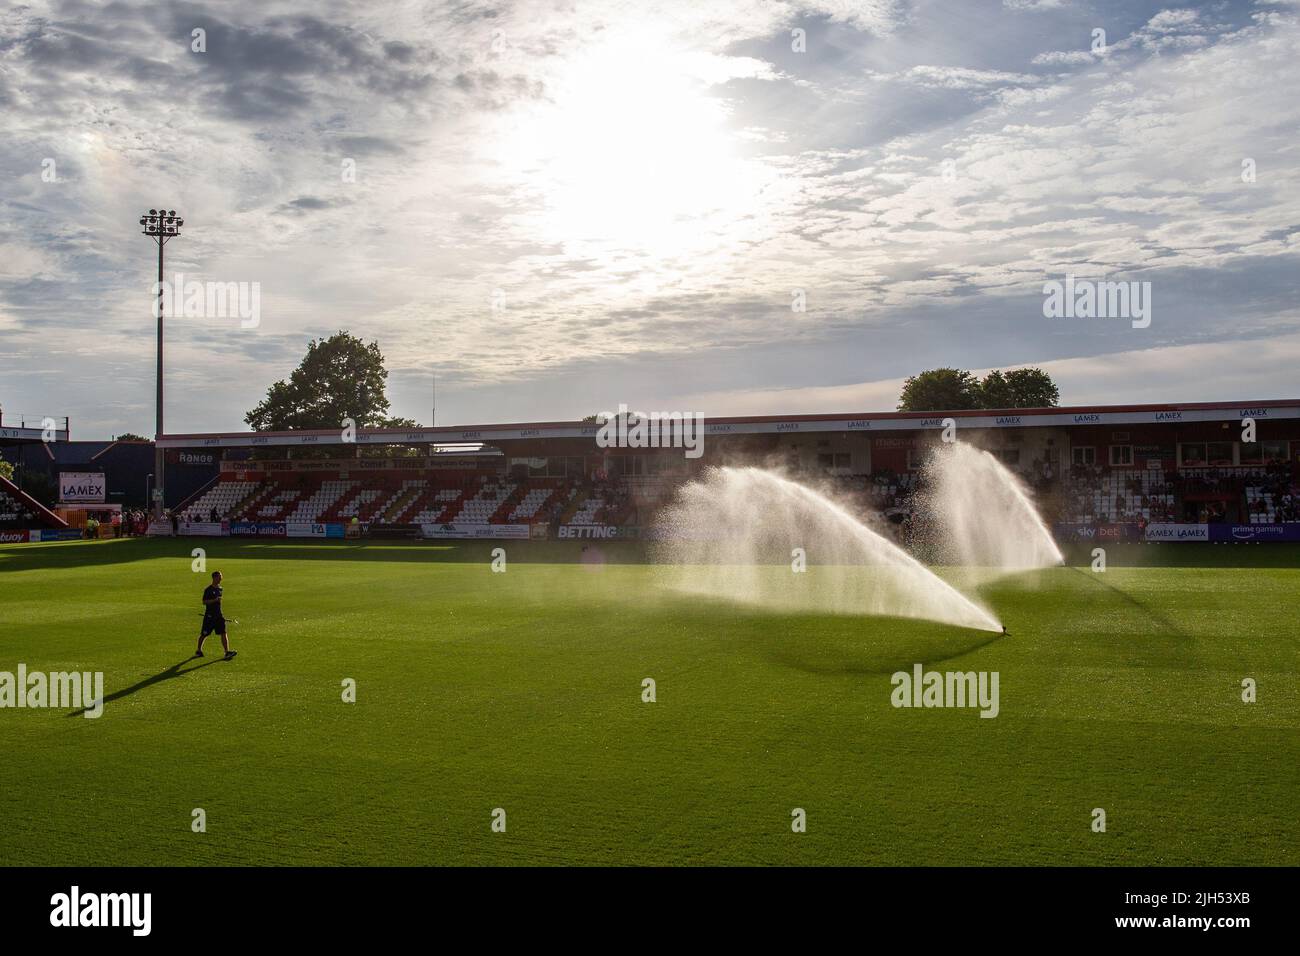 Water sprinkler system in operation at football stadium ahead of match. Stock Photo